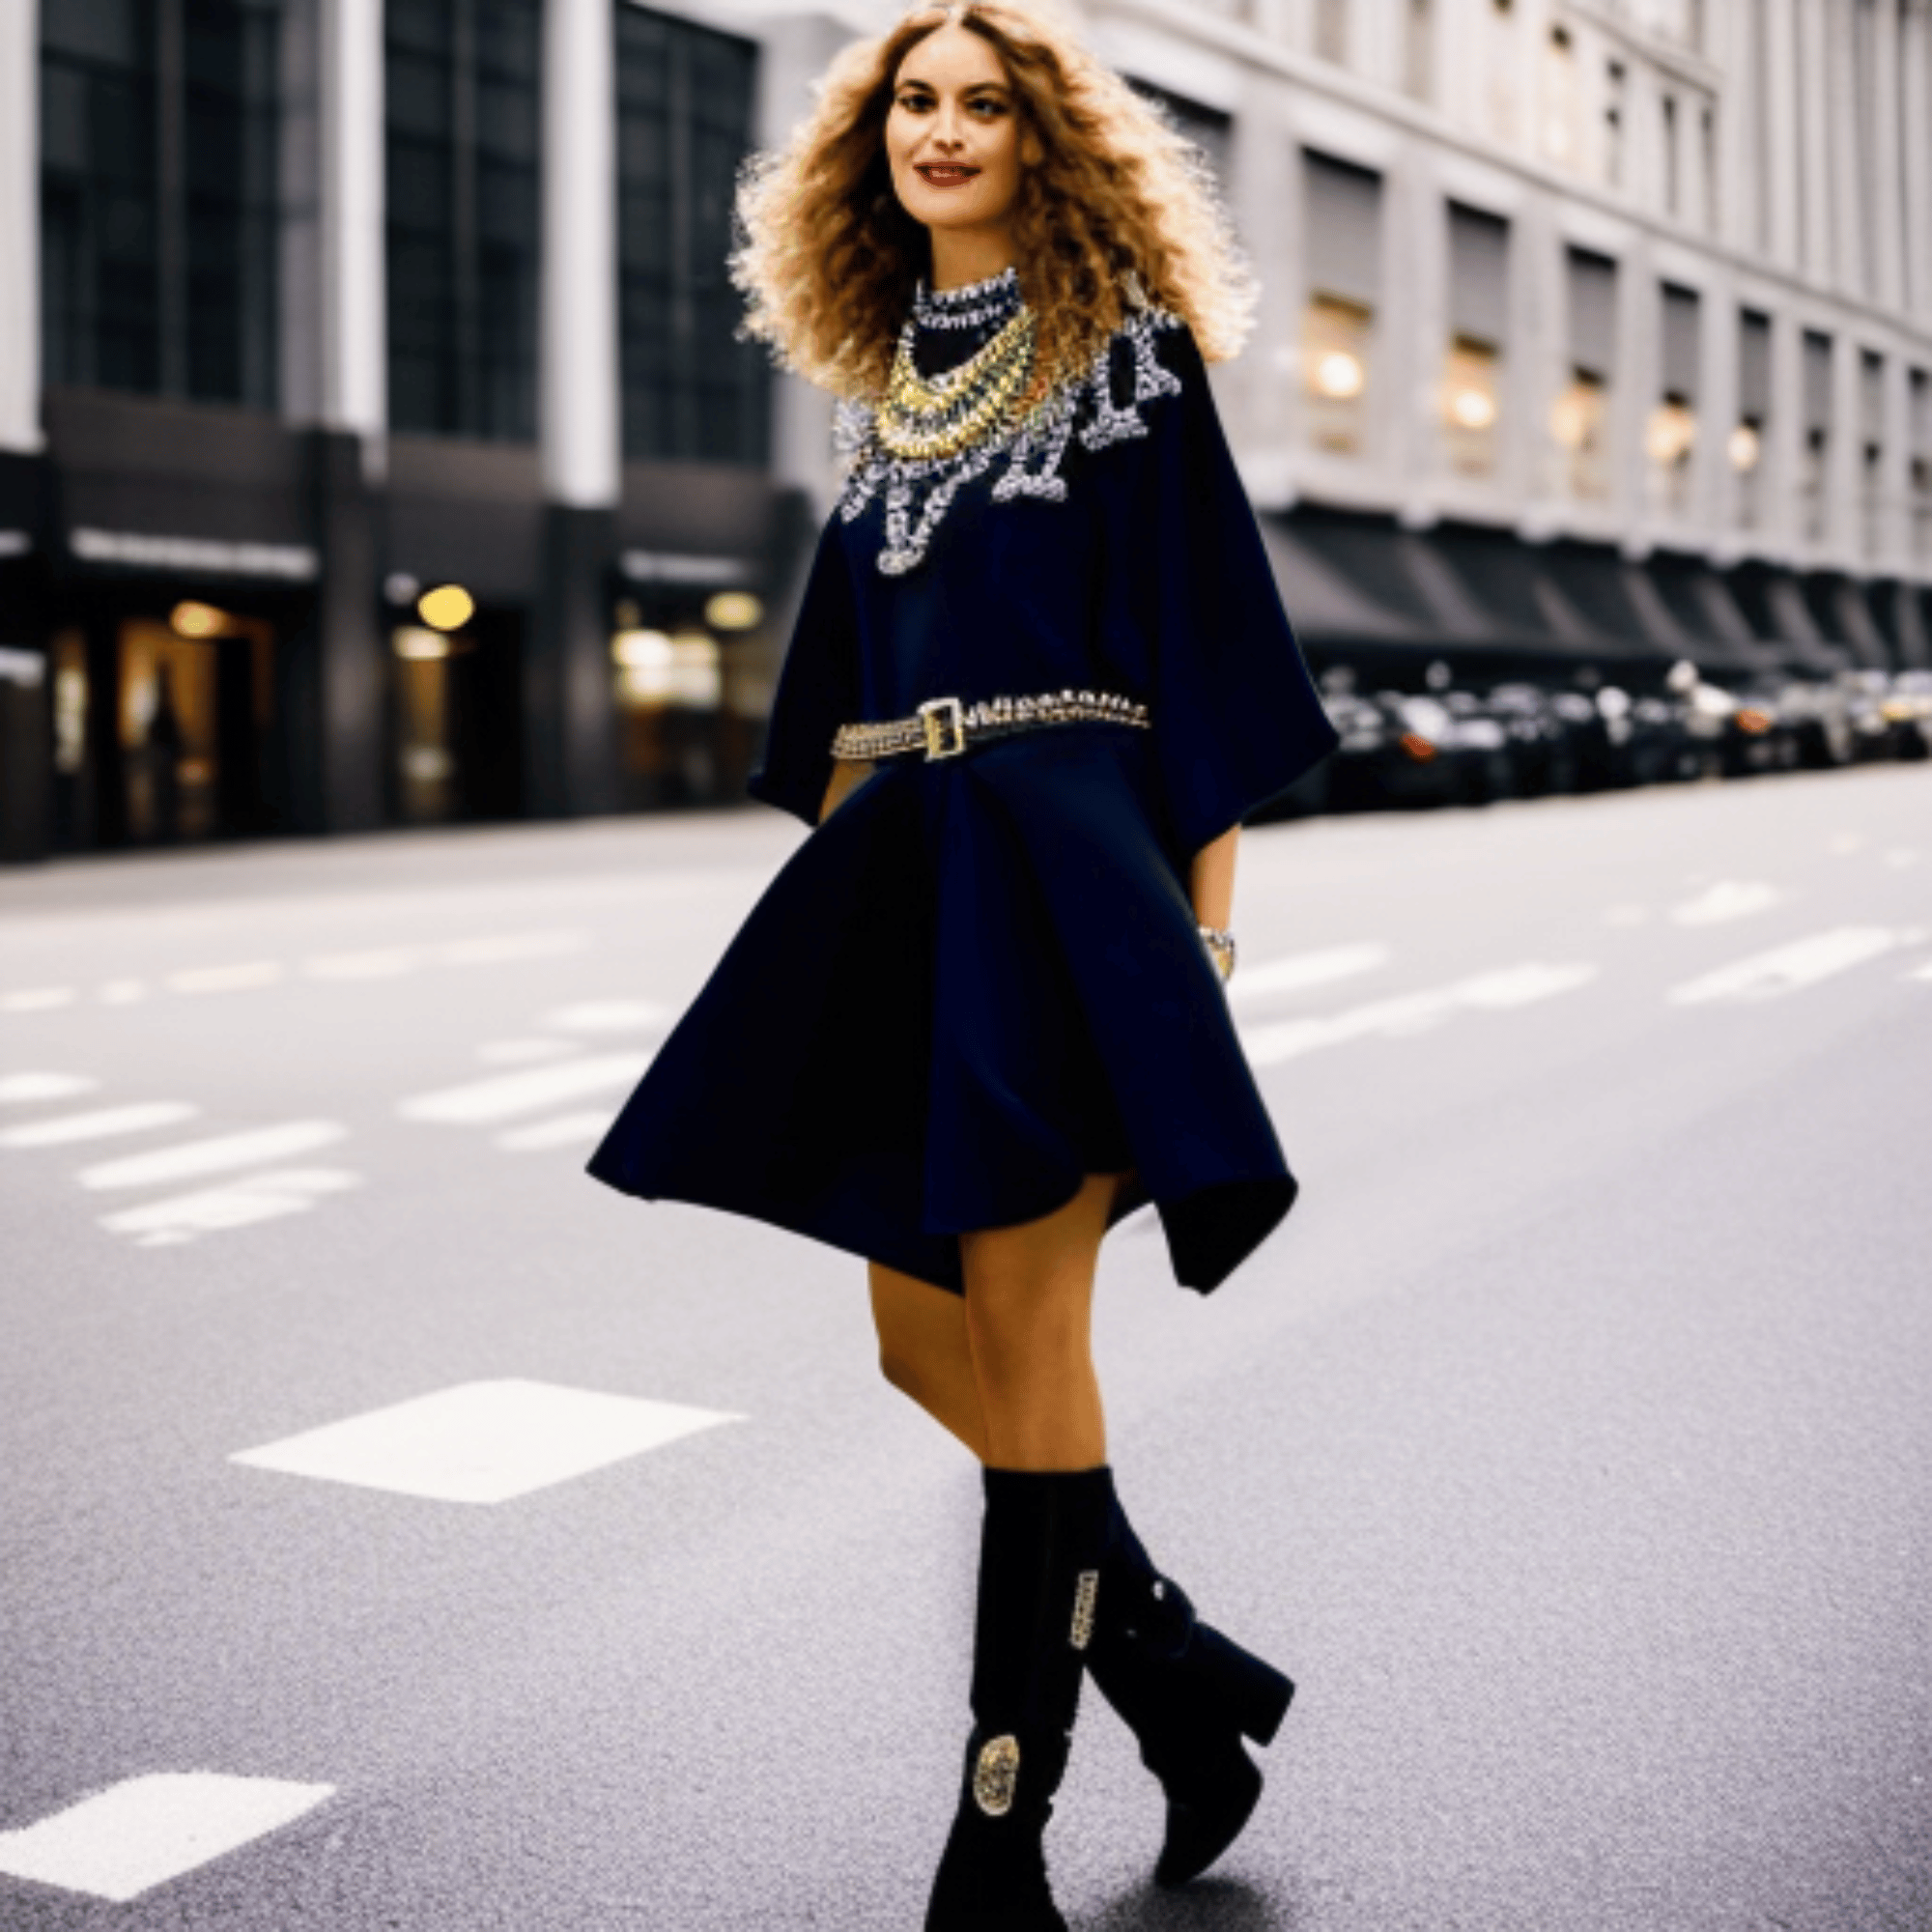 A woman wearing an oversized dress with a statement belt, paired with ankle boots and a statement necklace